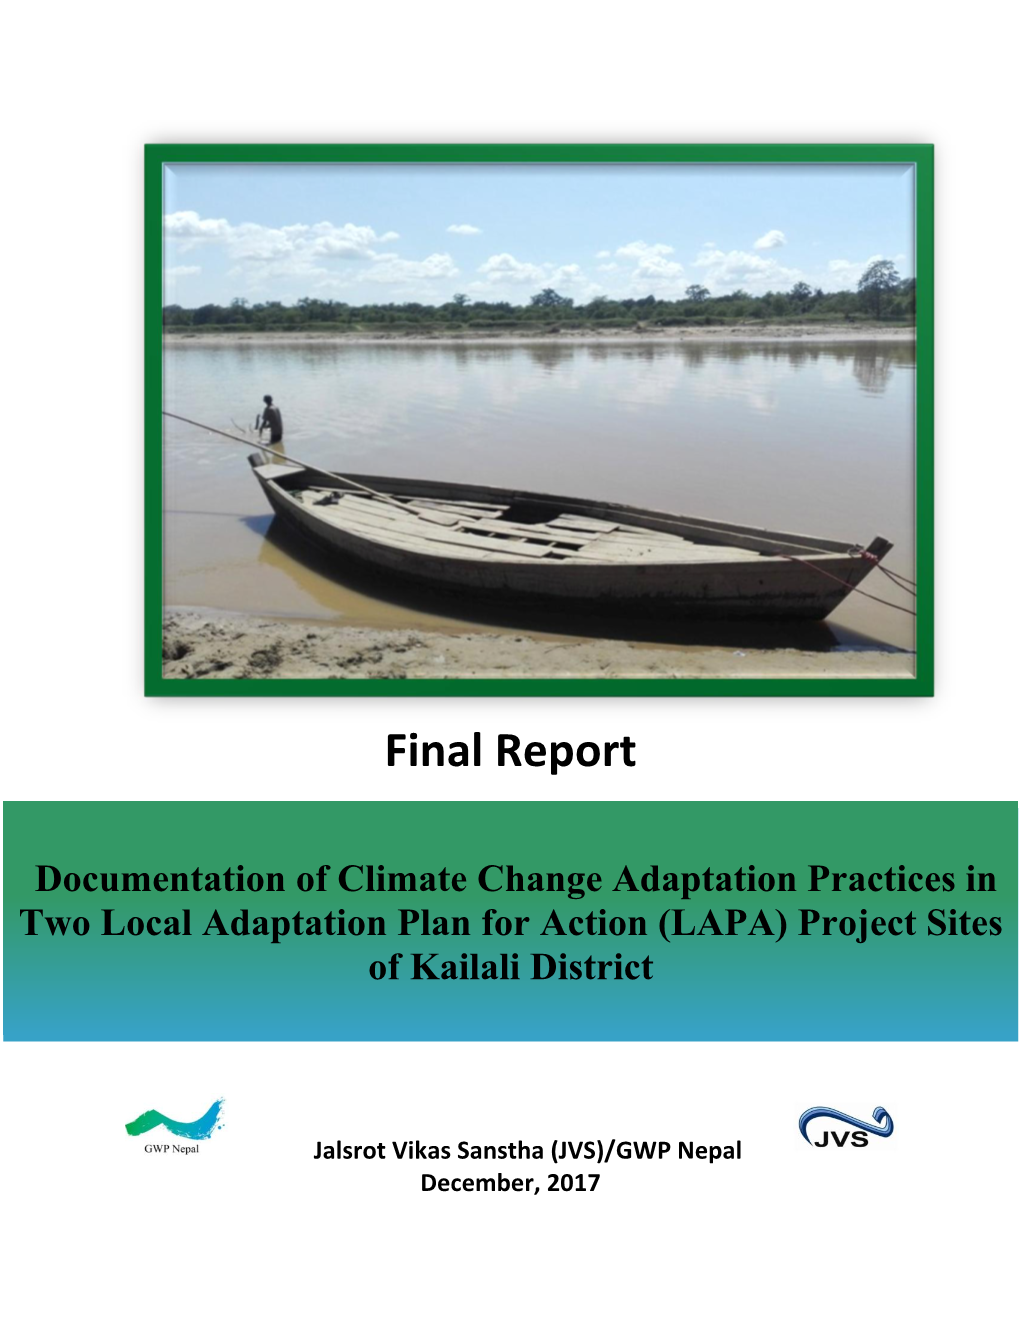 Documentation of Climate Change Adaptation Practices from Two LAPA Project Sites of Kailali District in Order to Promote And